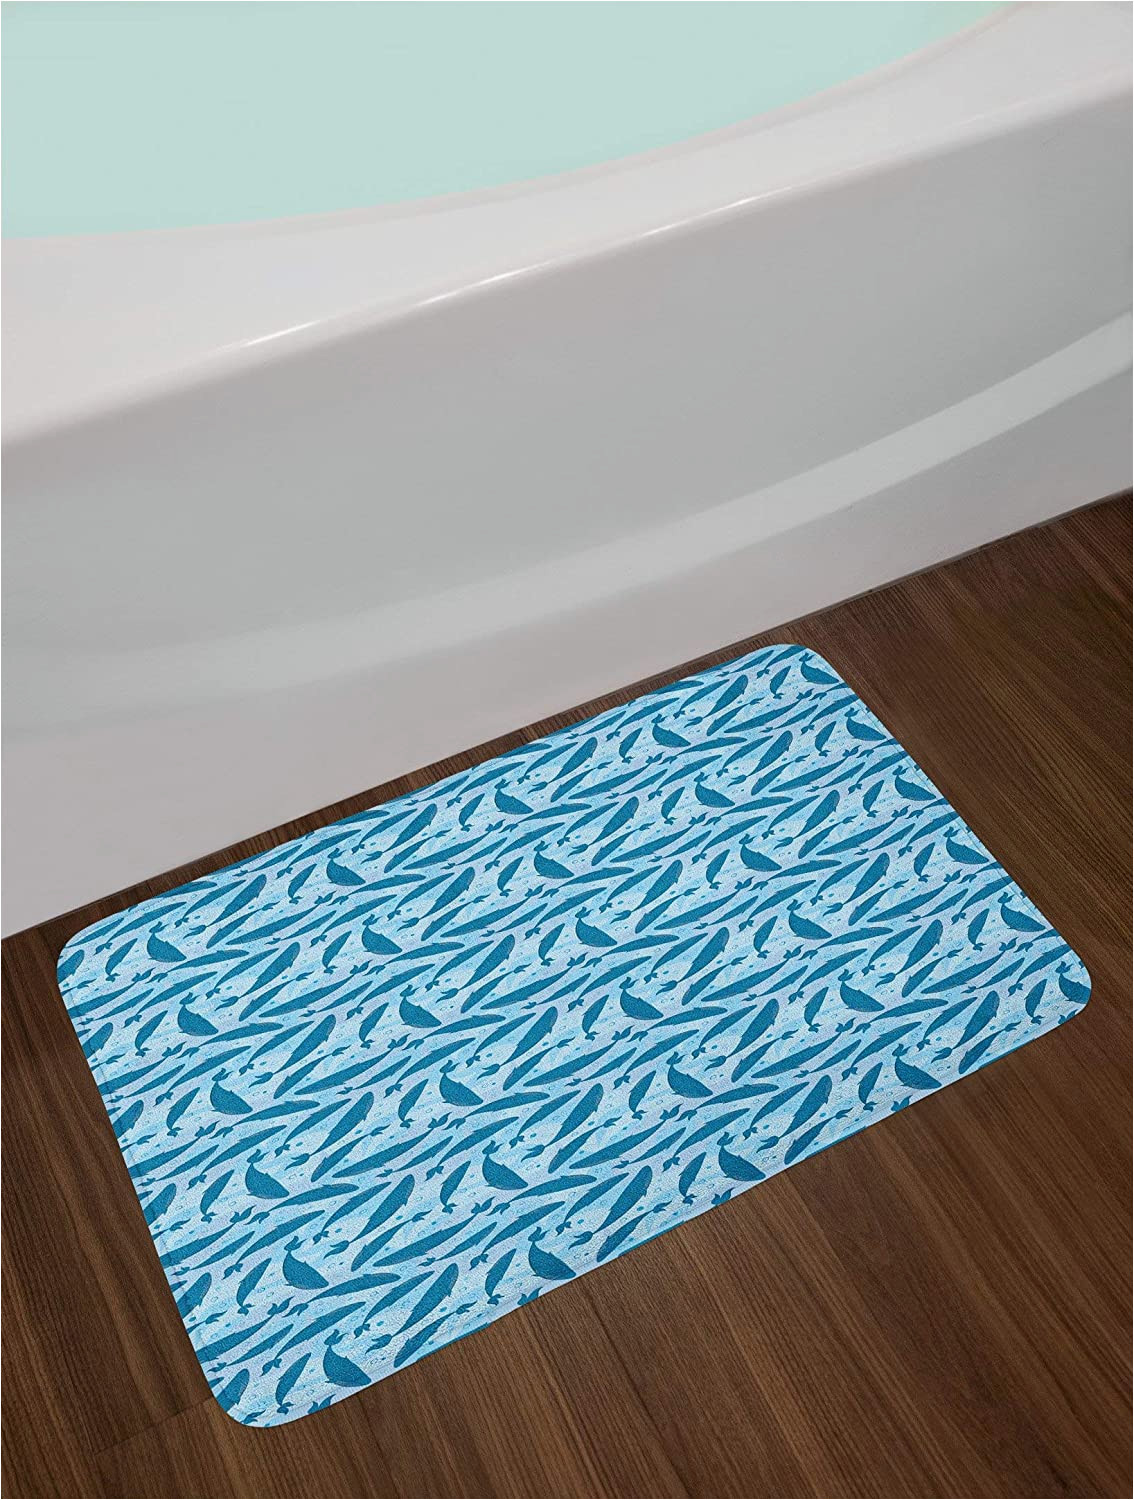 Best Non Slip Bath Rug Amazon Com Bath Rugs and Mats Big Blue Animals On Dotted